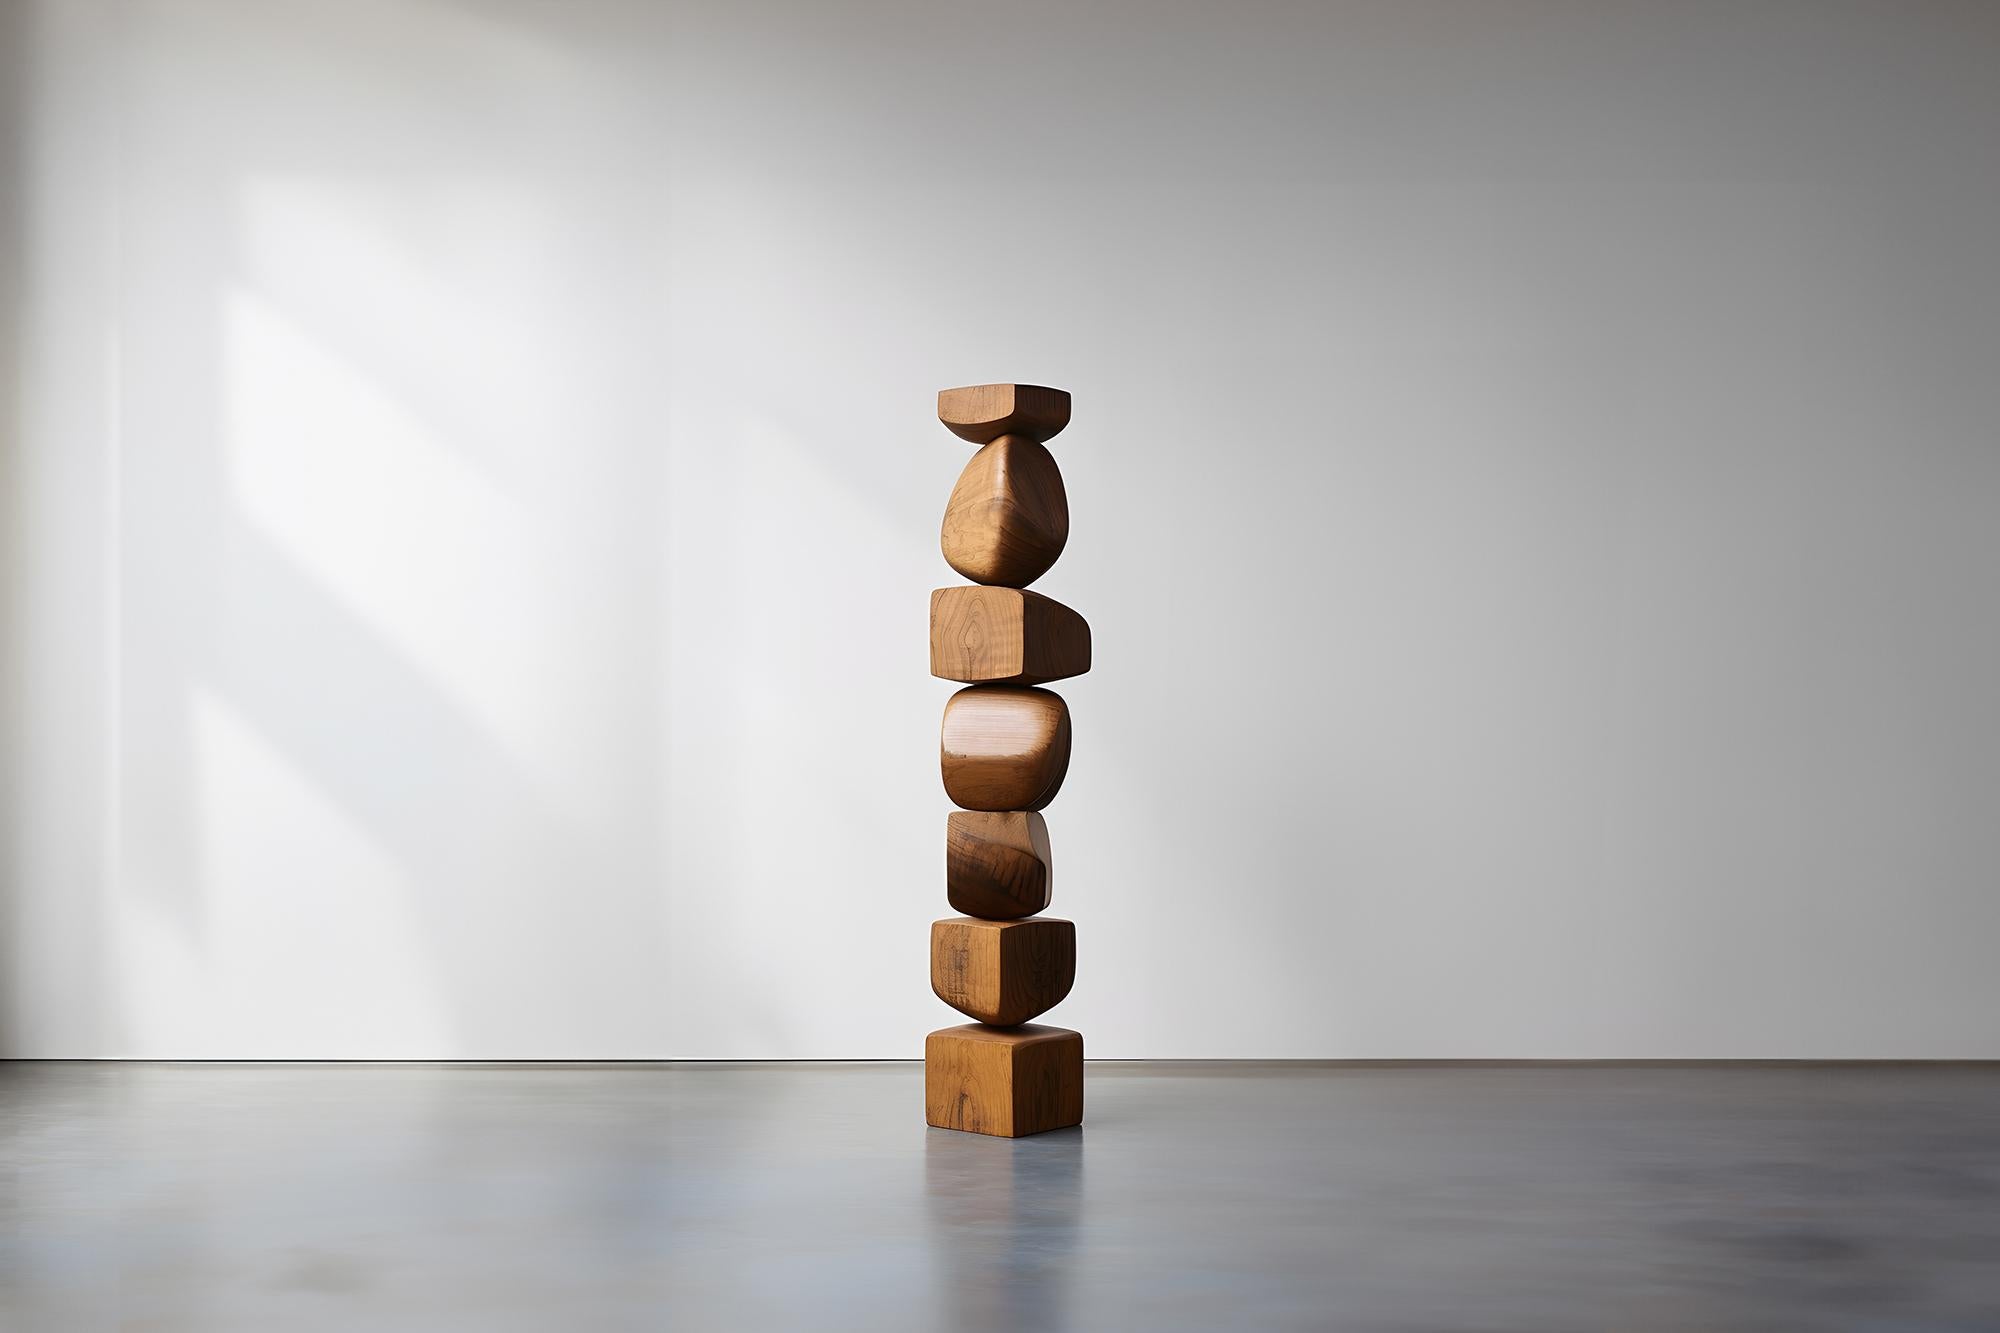 Mid-Century Modern Carved Wooden Elegance Still Stand No72: Abstract Totem by Joel Escalona For Sale